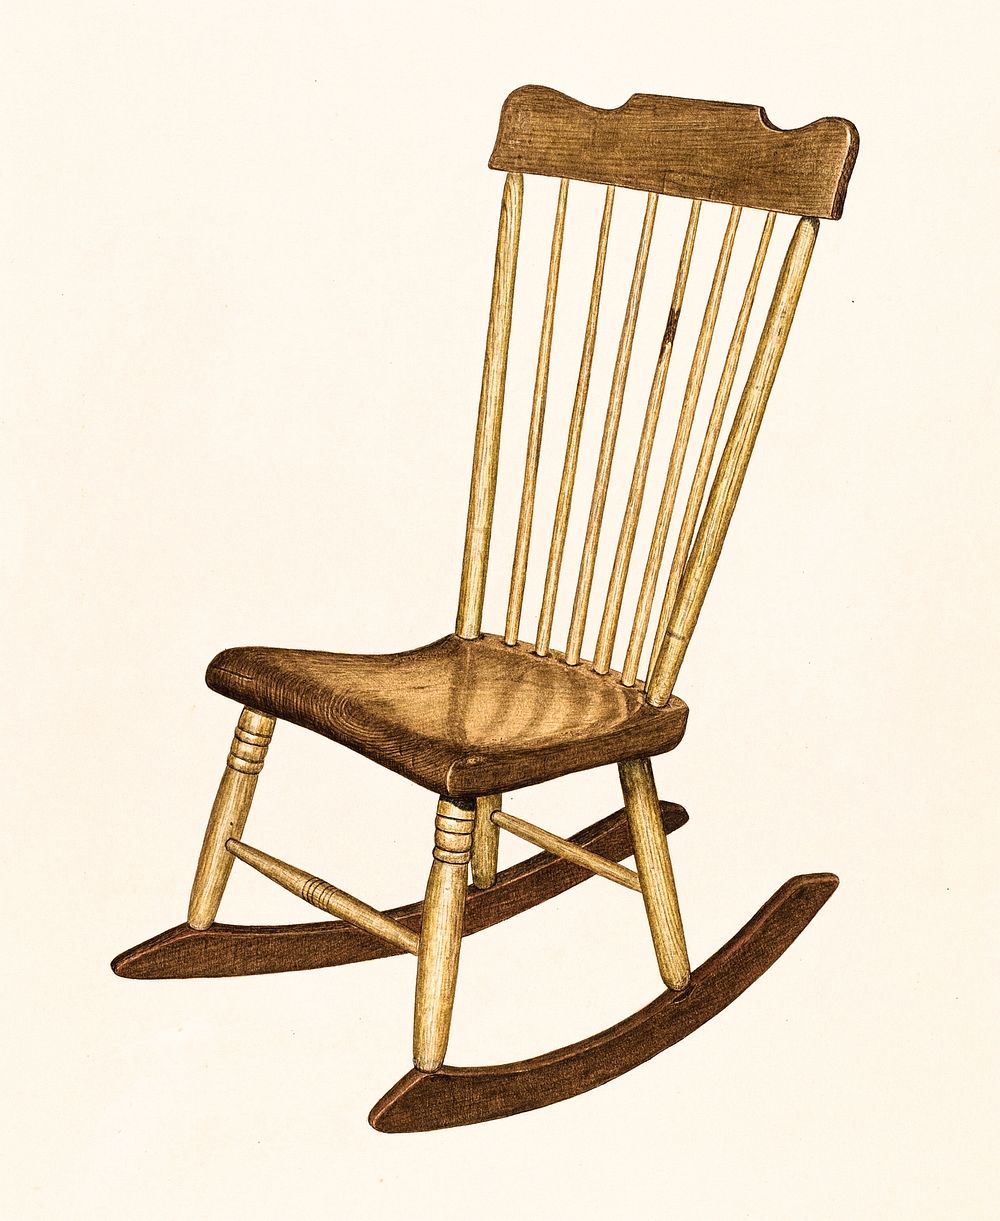 Rocking Chair (1940) by LeRoy Griffith. Original from The National Gallery of Art. Digitally enhanced by rawpixel.